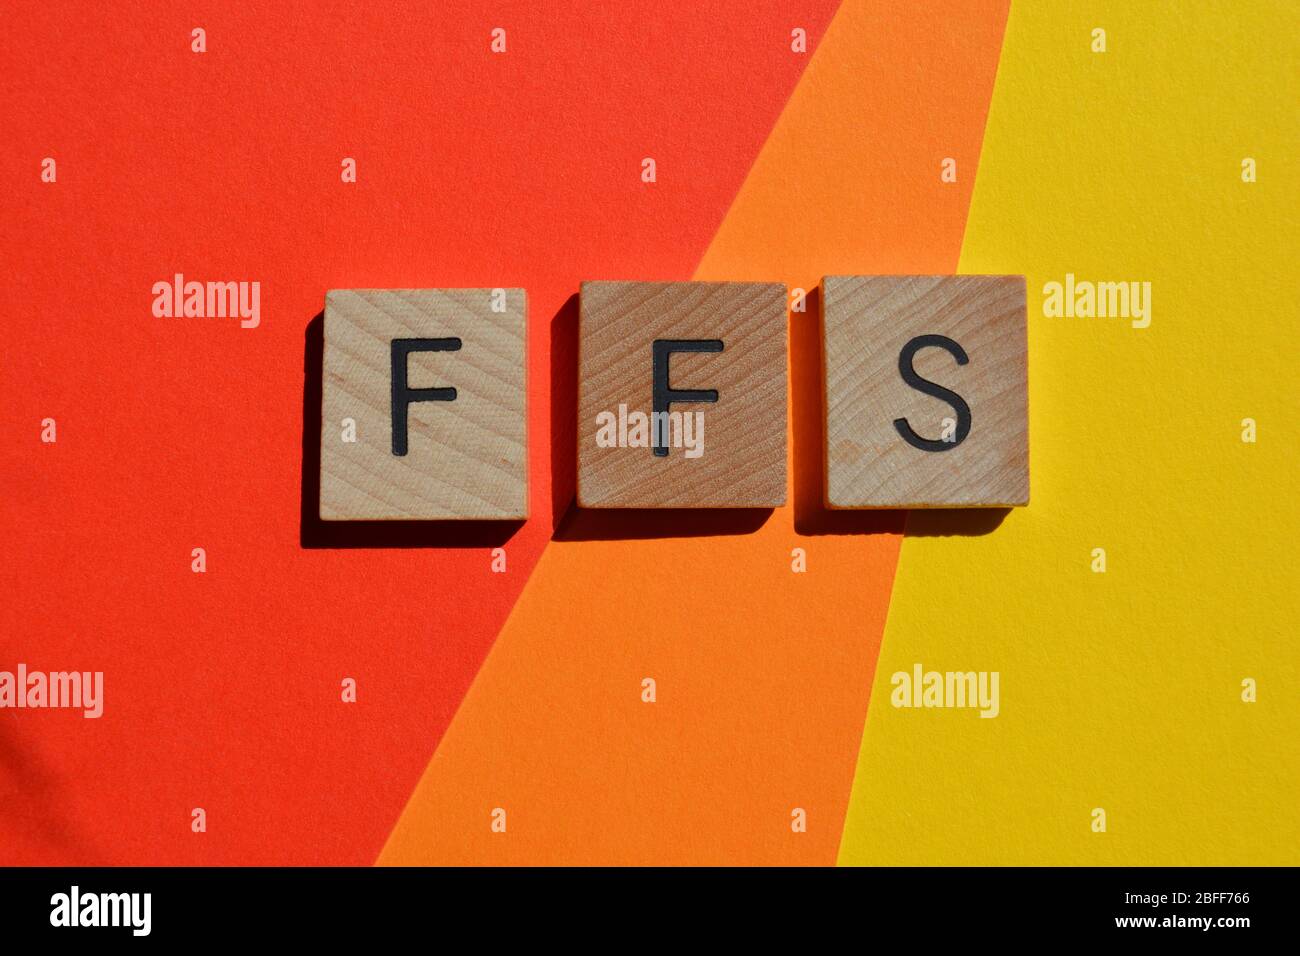 FFS, acronym used in text speak to express surprise, disgust or shock Stock  Photo - Alamy